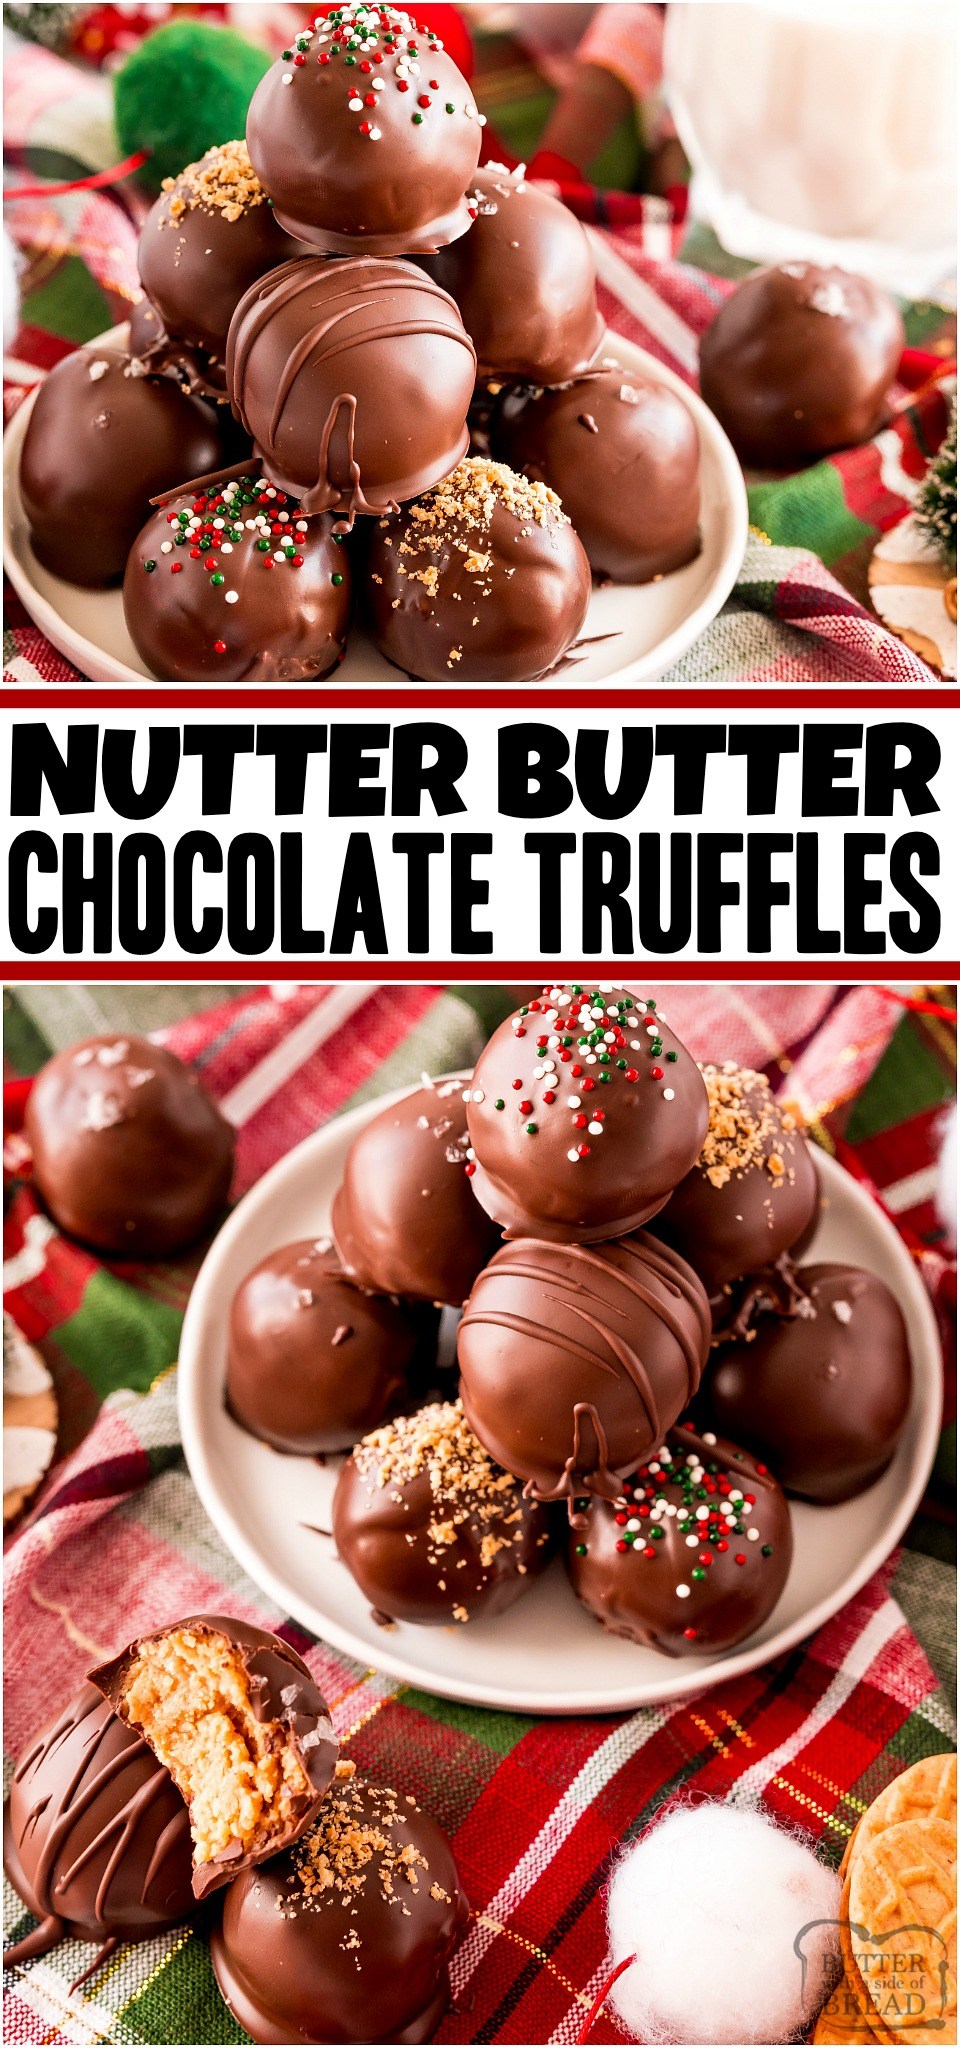 Nutter Butter Truffles made with 5 basic ingredients & perfect for holiday goodie trays! Festive, easy cookie balls with Nutter butters, cream cheese, peanut butter & chocolate! #NutterButter #candy #homemade #truffles #chocolate #Christmas #easyrecipe from BUTTER WITH A SIDE OF BREAD